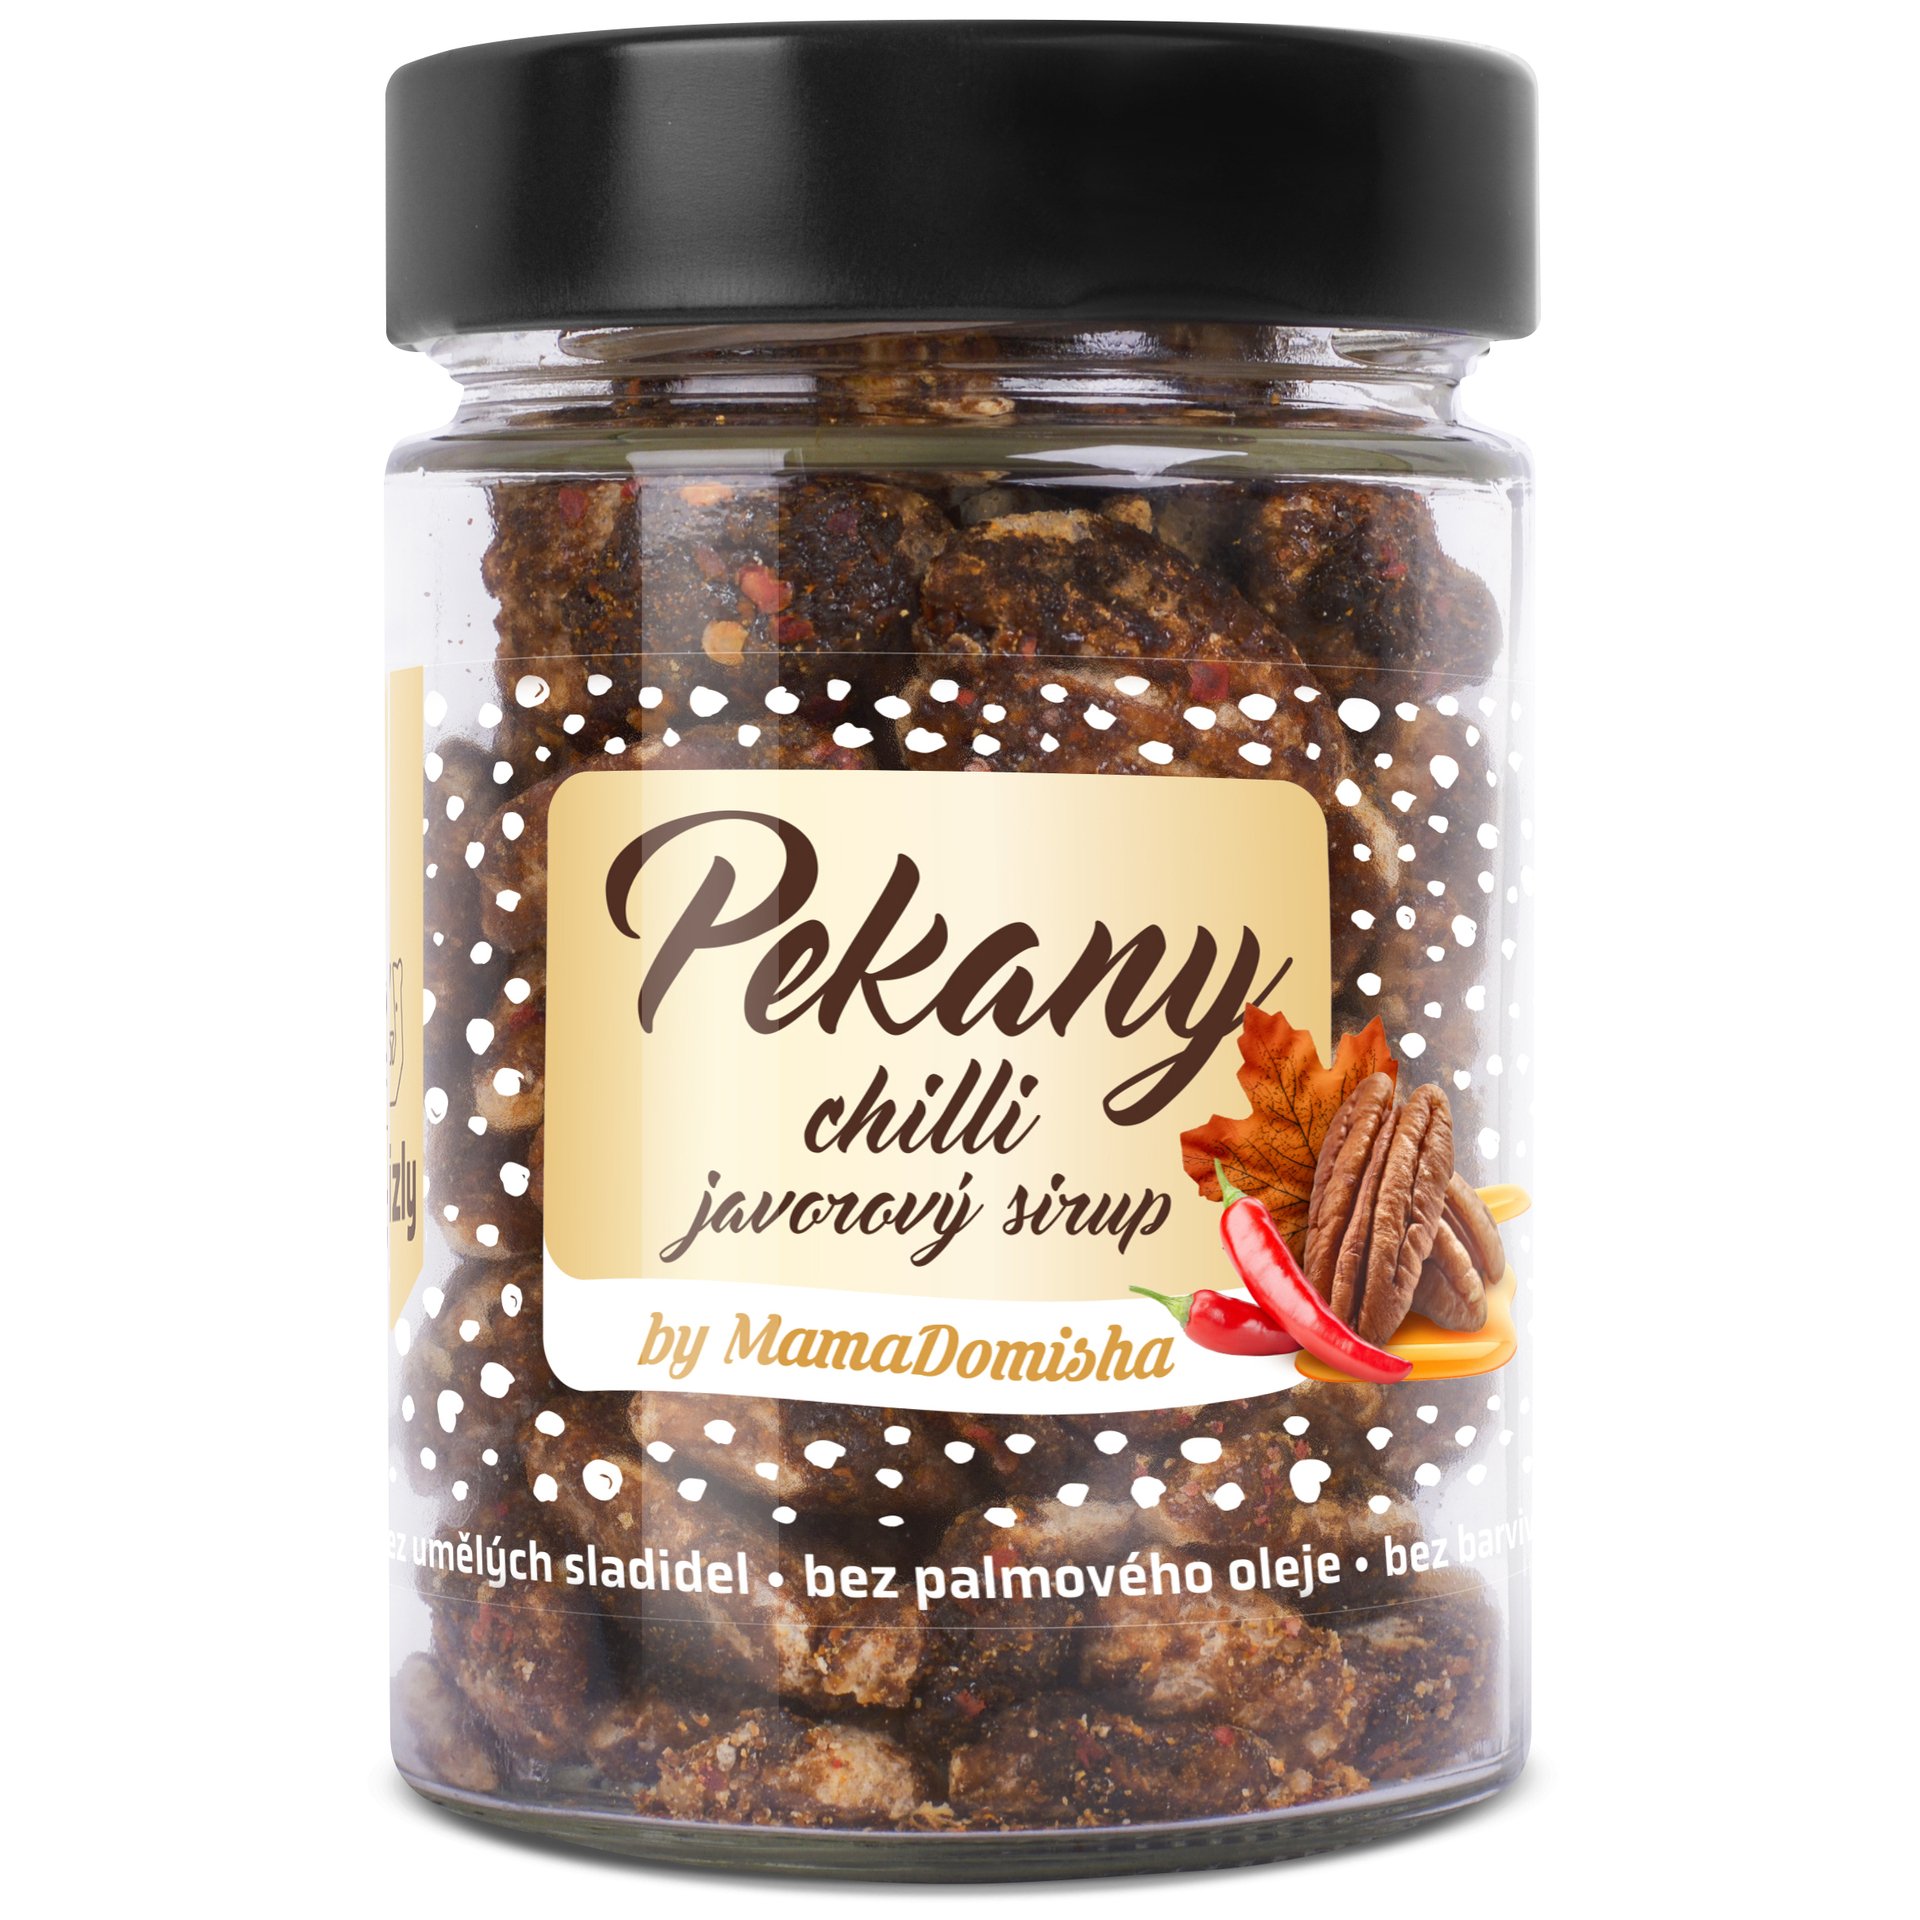 E-shop GRIZLY Pekany chilli javorový sirup by @mamadomisha 150 g